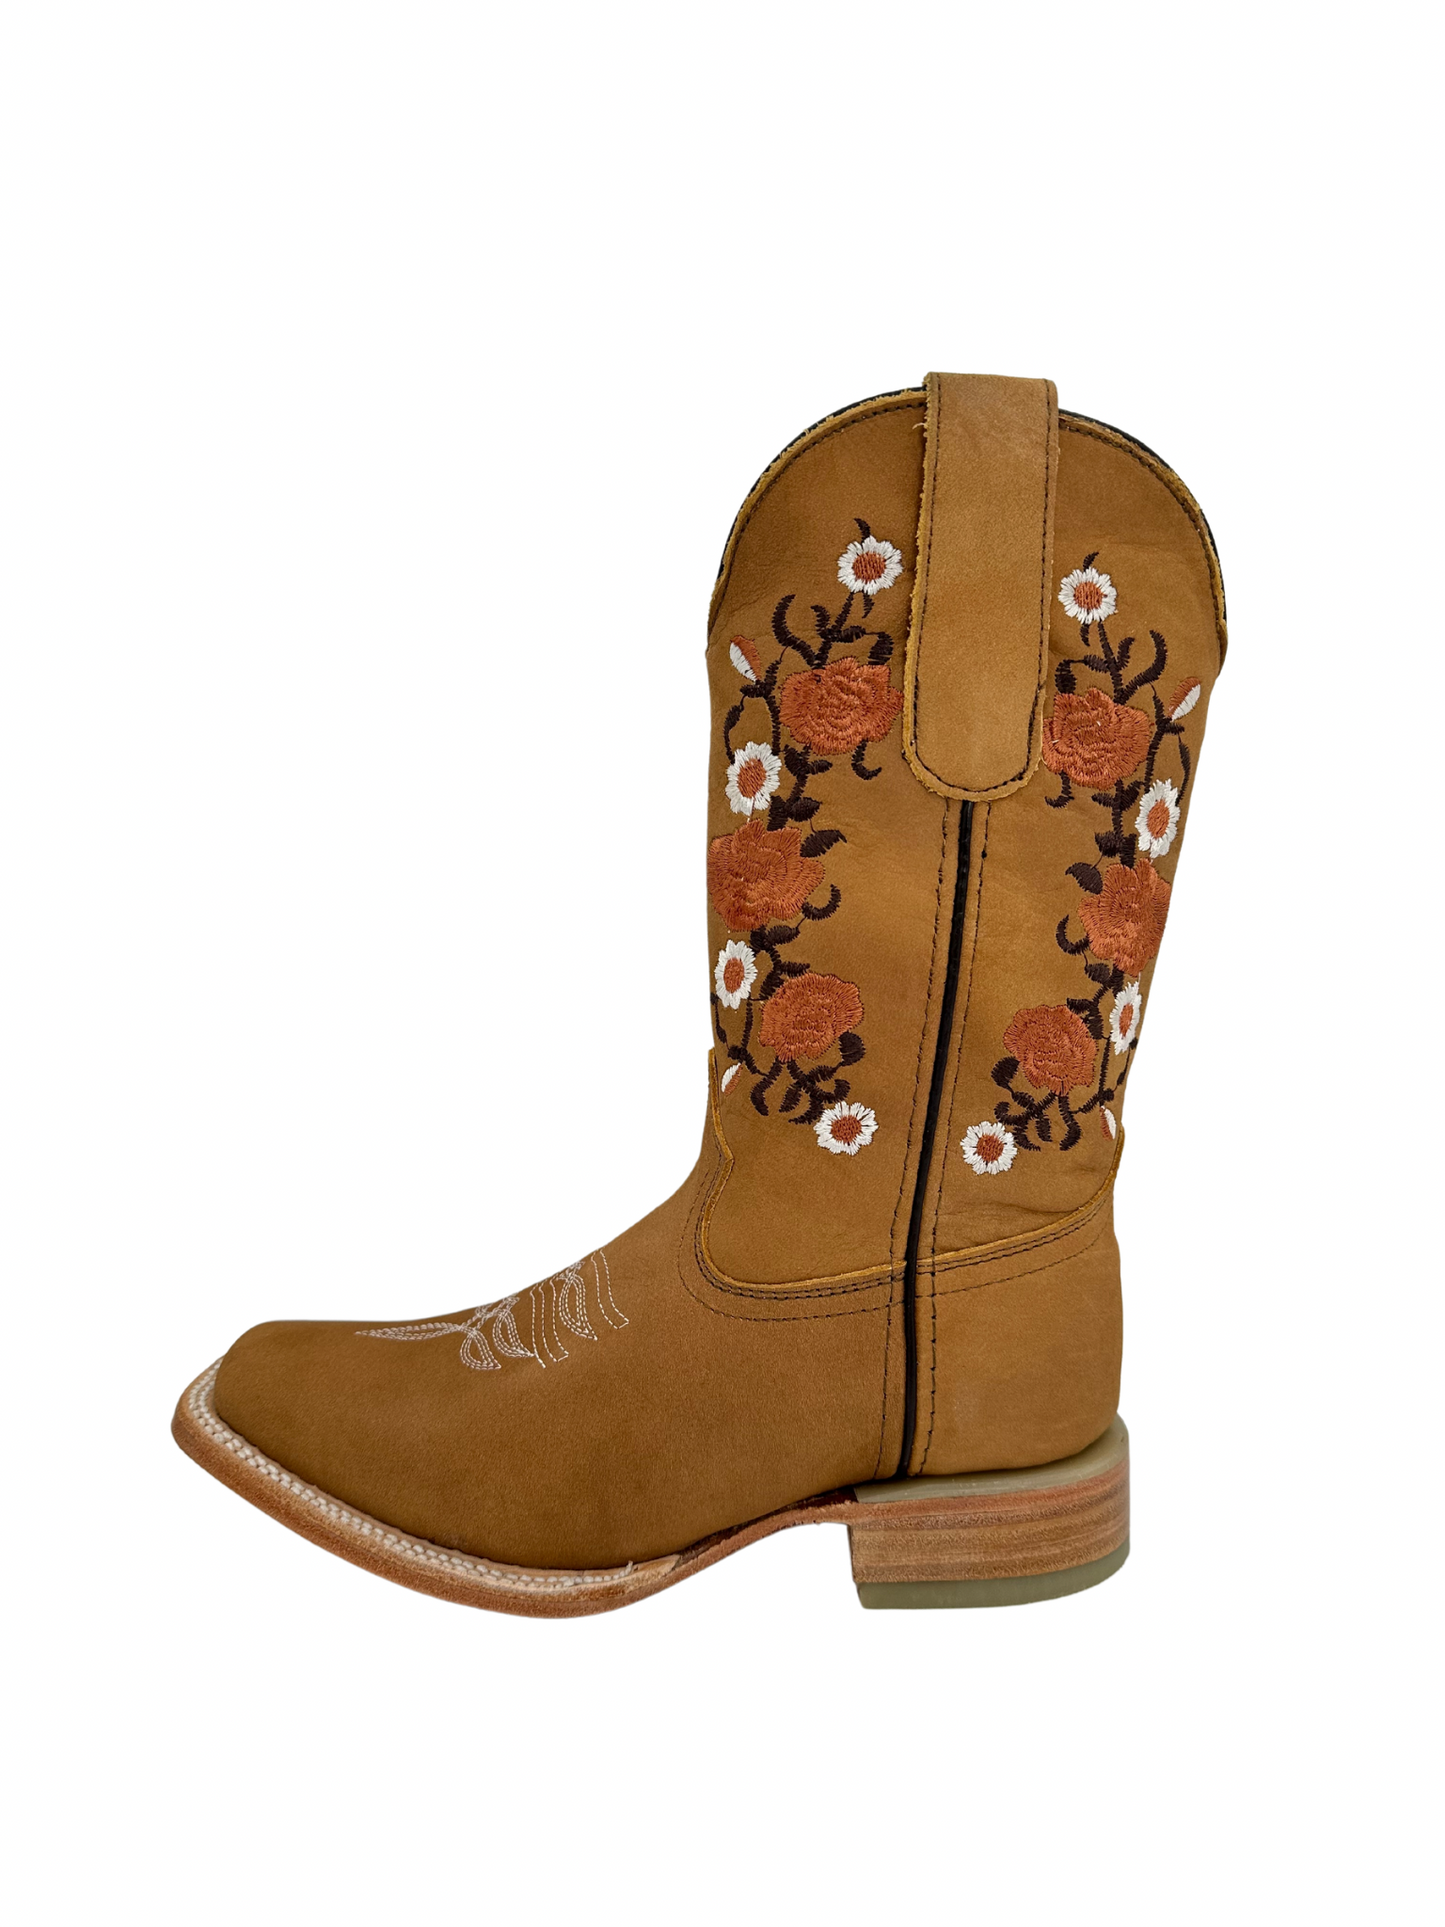 Stephy Women's Nobuck Honey Floral Square Toe Boot